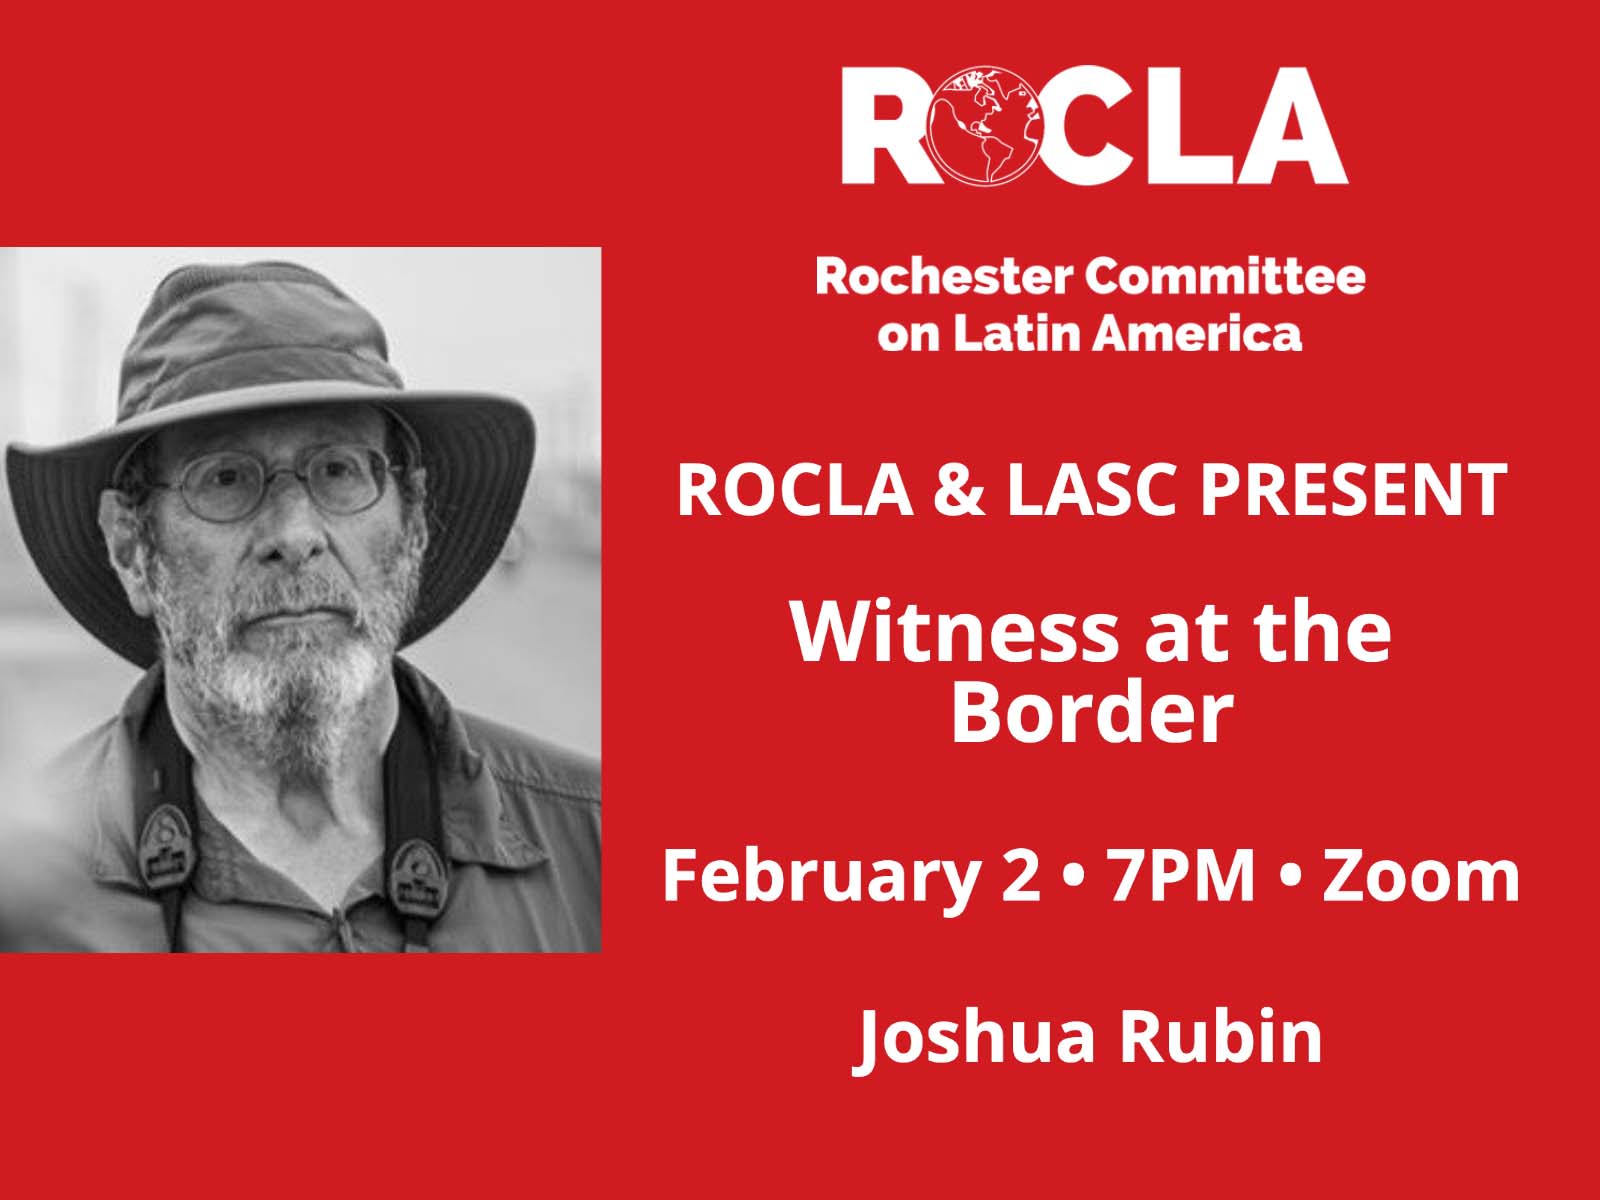 Event titled Crisis at the Border with photo of Joshua Rubin